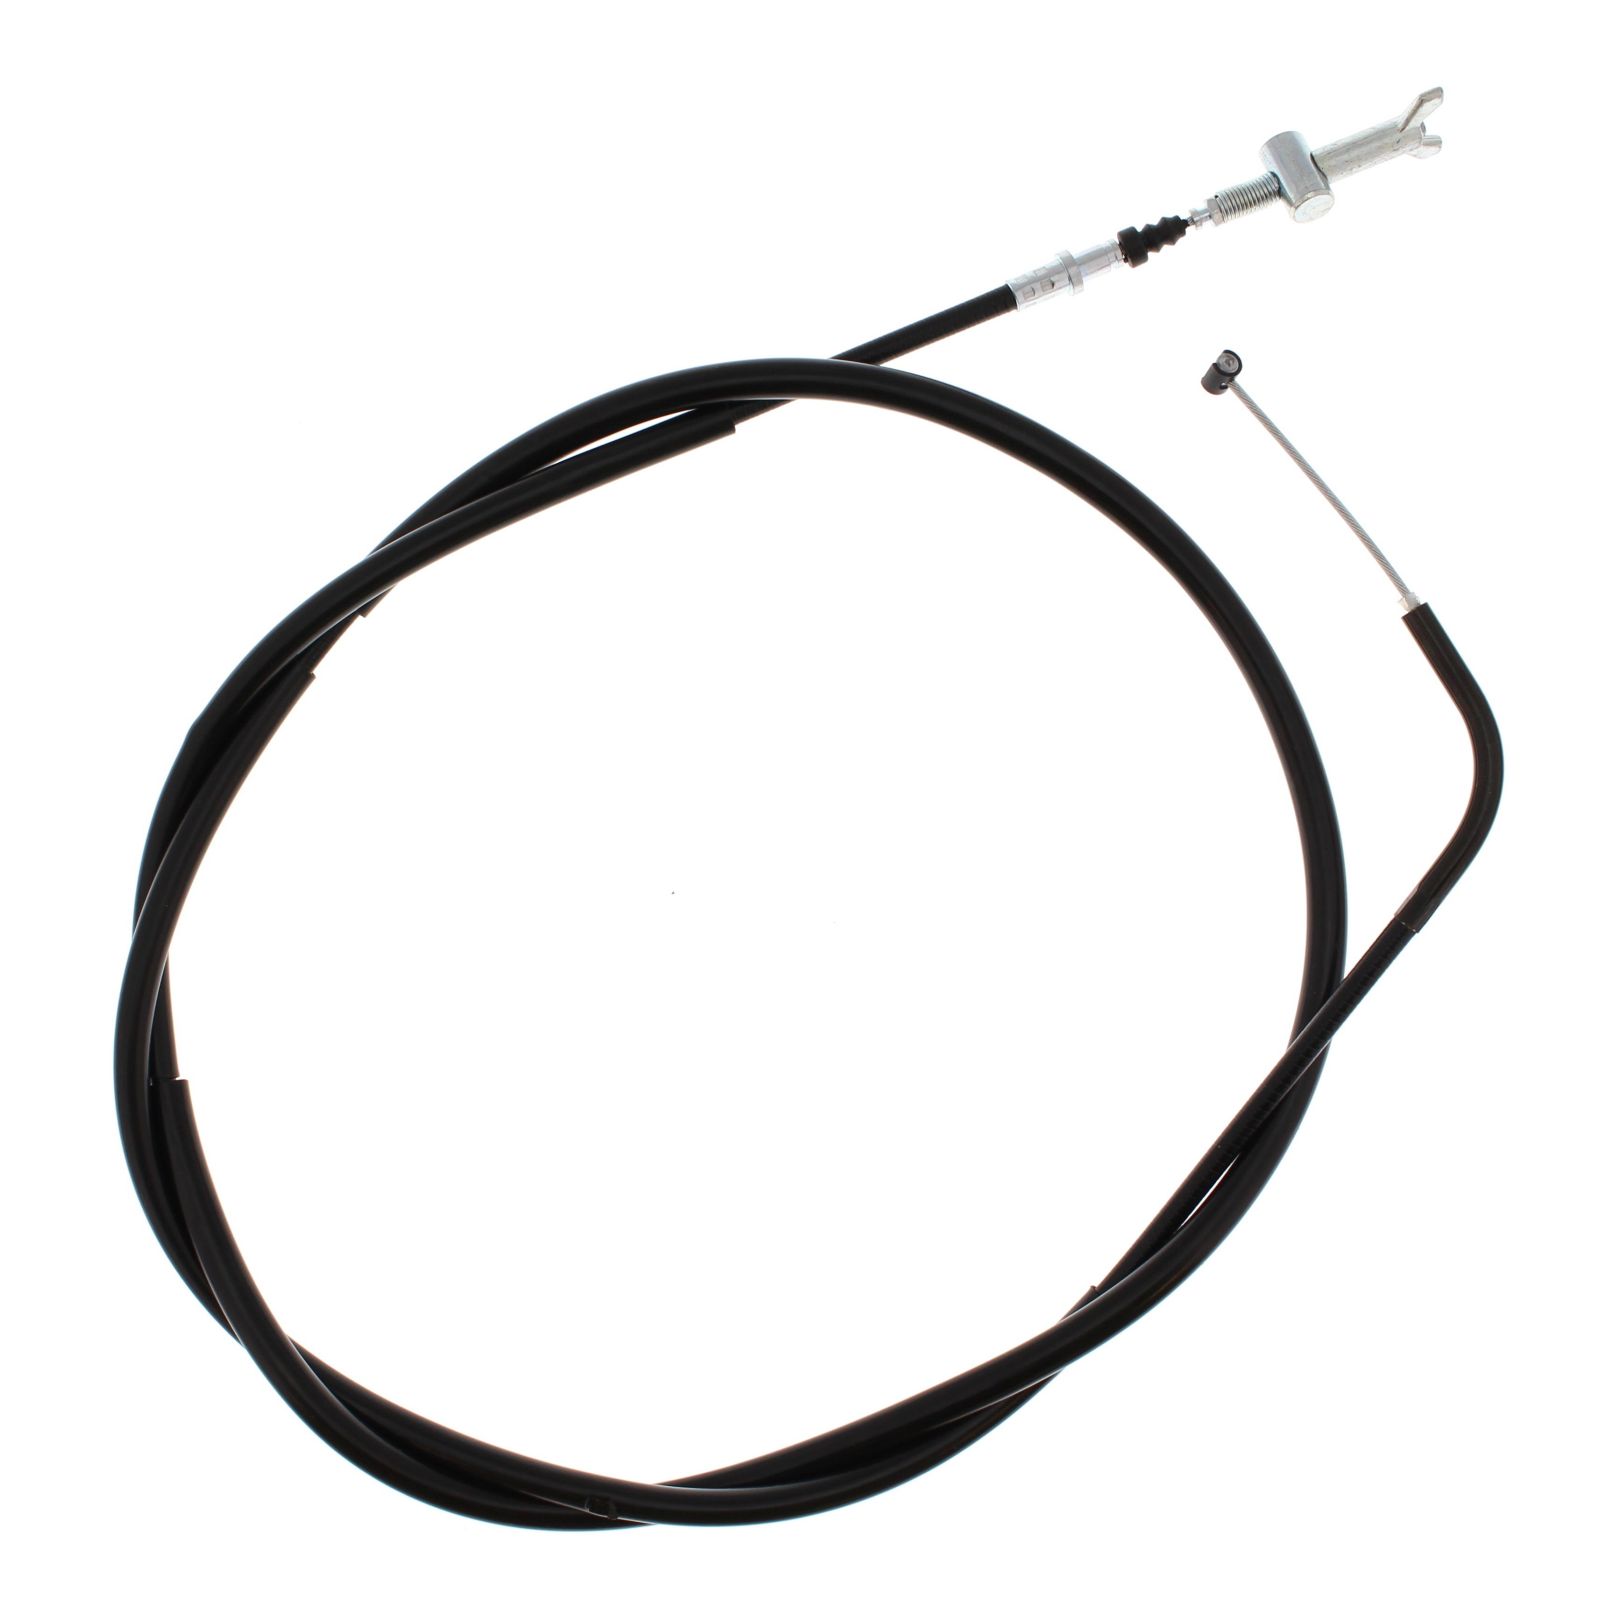 Wrp Brake Cables - WRP454061 image